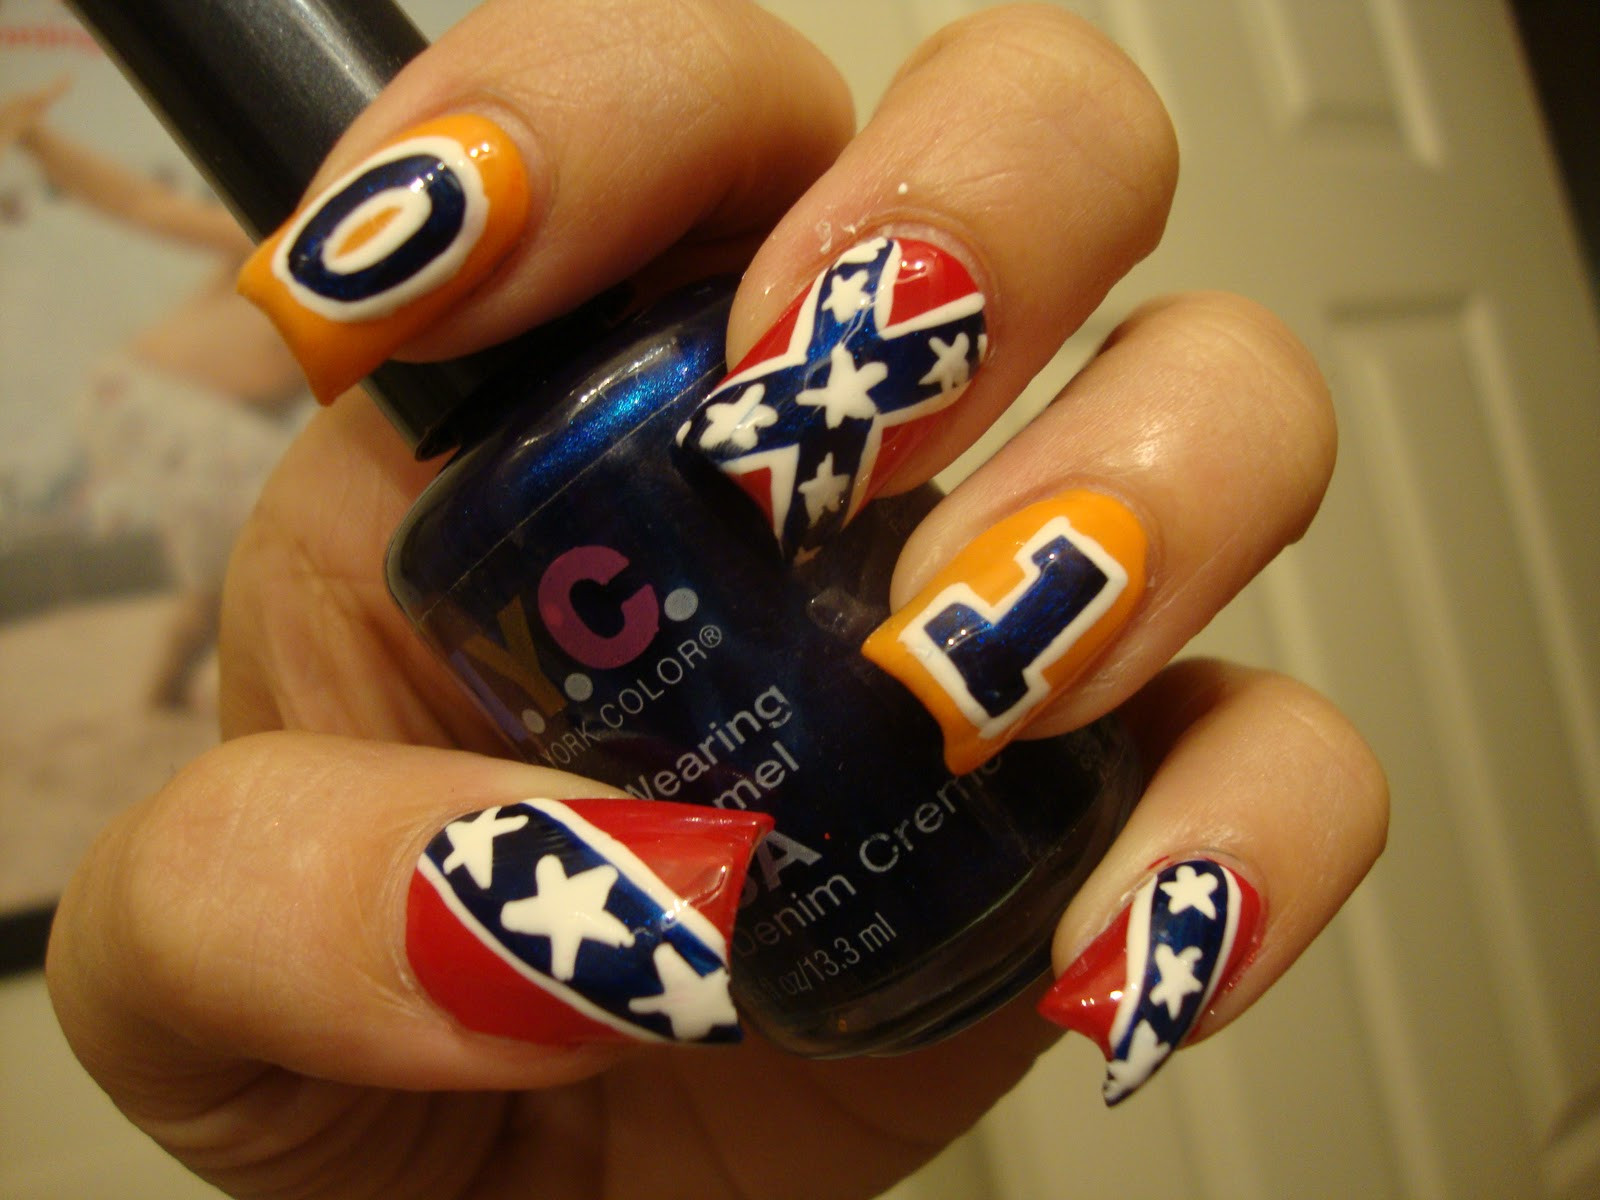 Rebel Flag Nail Designs
 obsessed 30 Day Nail Challenge Day 28 Inspired by a Flag